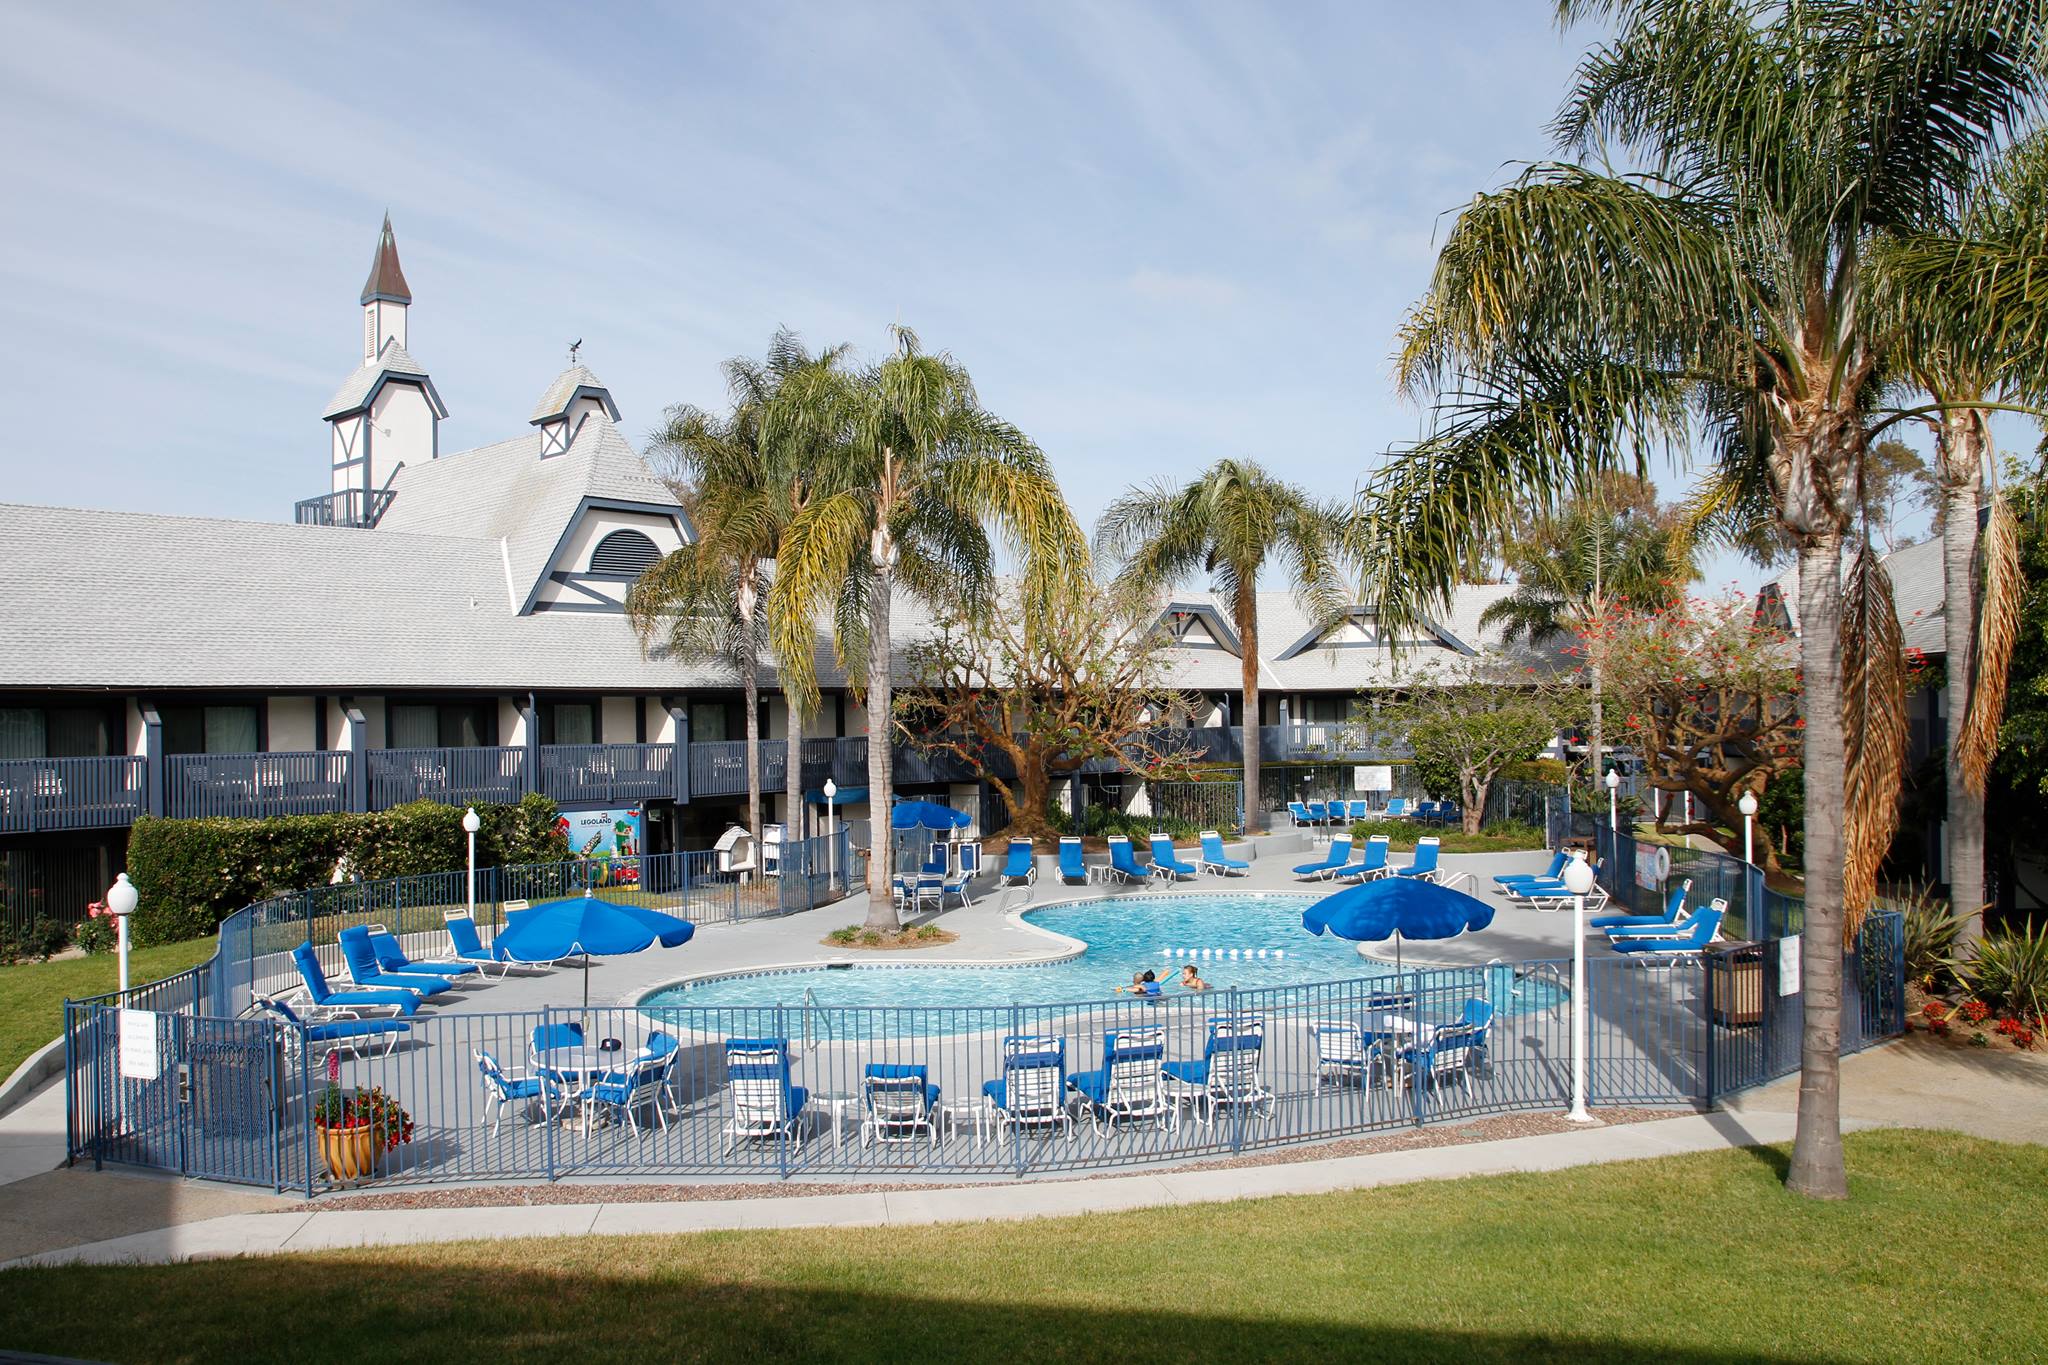 The Carlsbad by the Sea Resort in Carlsbad California owned by RAR Hospitality is a former Holiday Inn